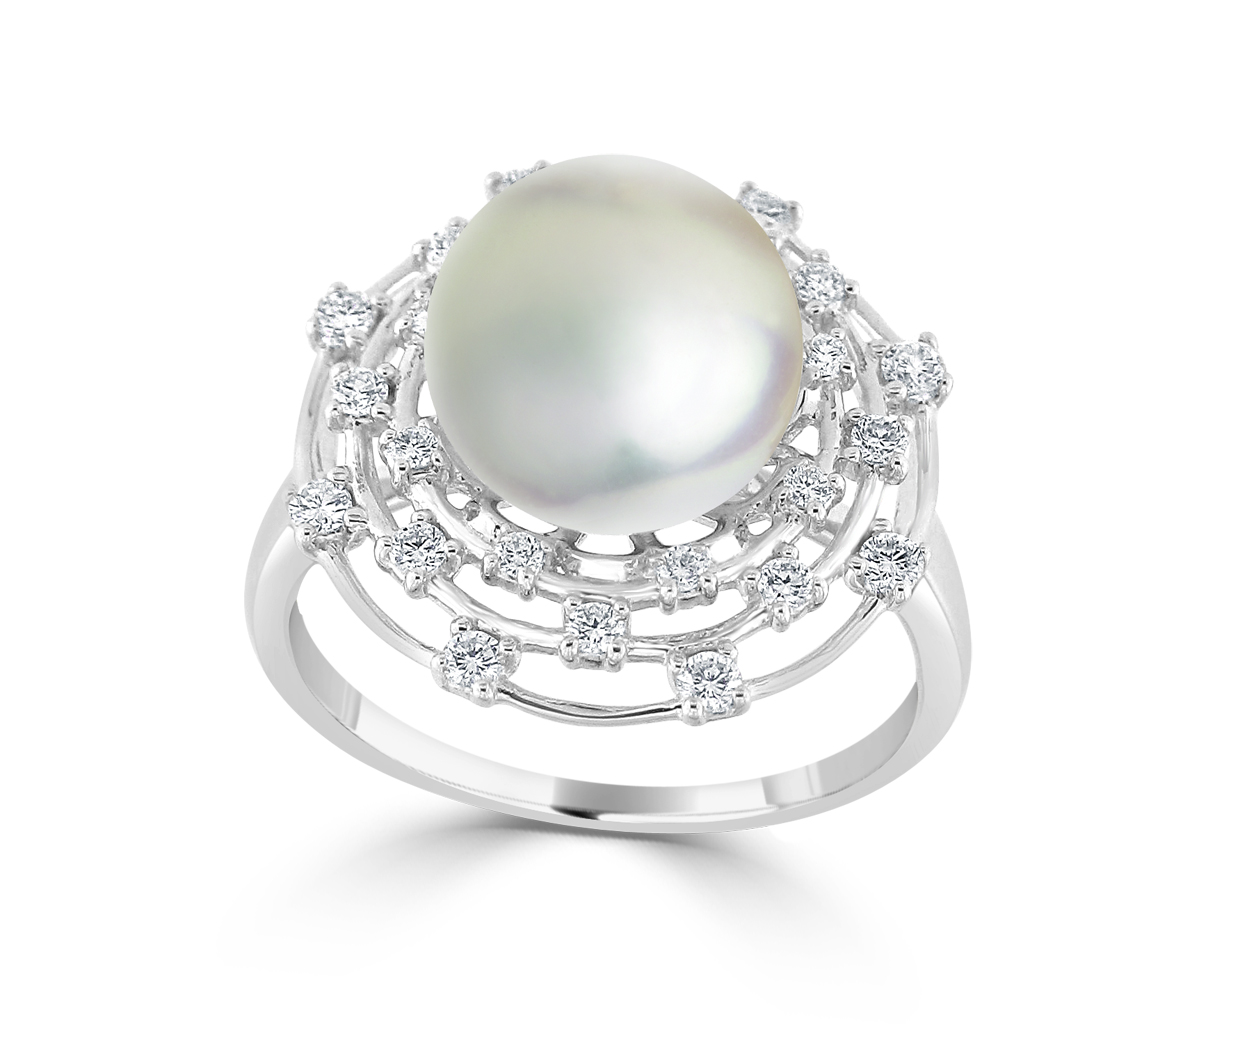 RING BY LA MARQUISE FINE JEWELLERY